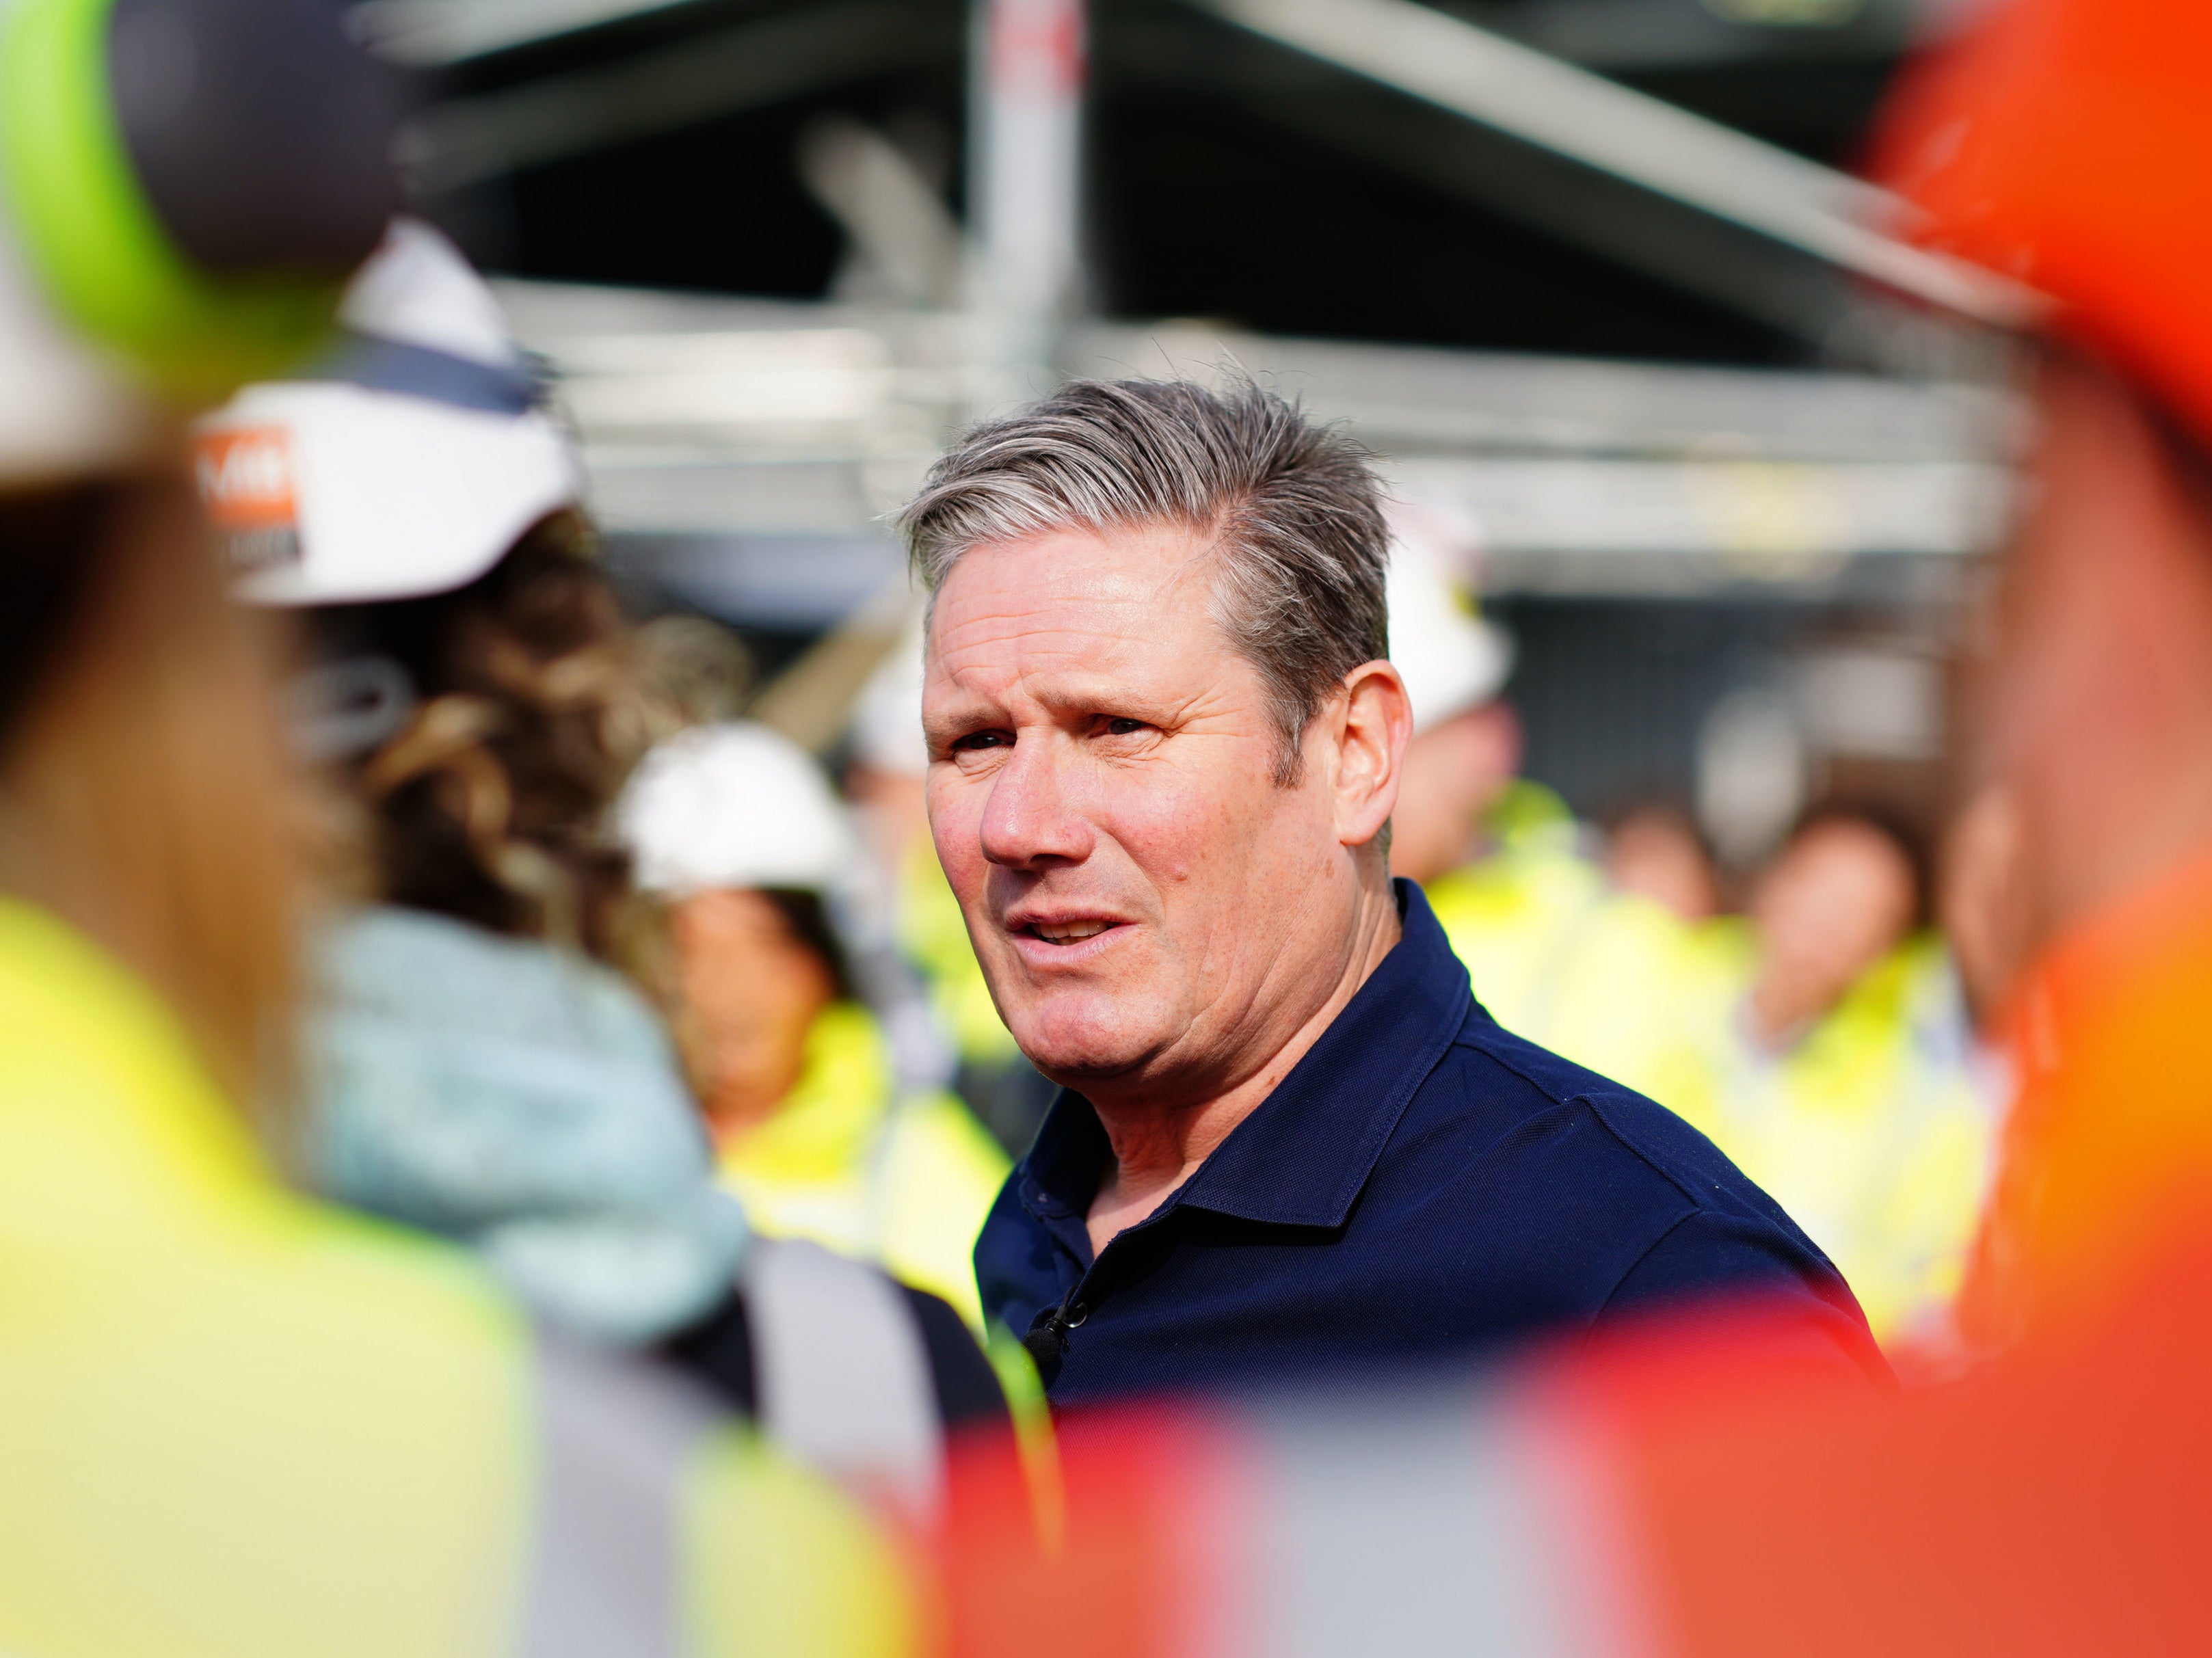 Keir Starmer has pledged to end new North Sea oil and gas drilling